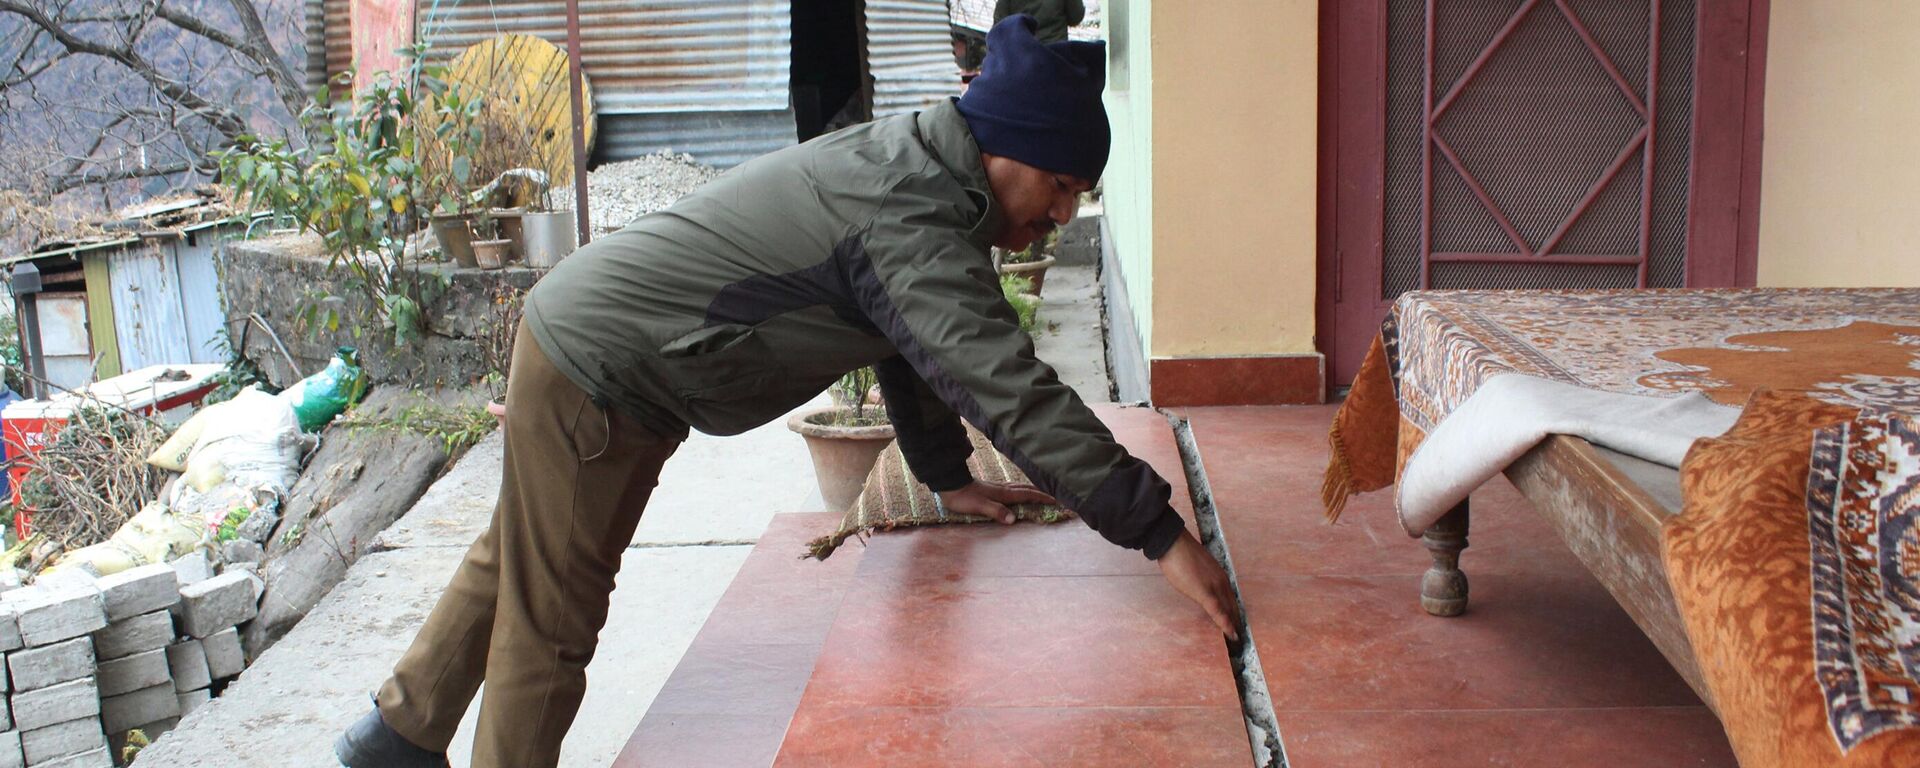 A policeman checks a crack in a house in Joshimath, in Chamoli district of Uttarakhand on January 11, 2023, after authorities in one of the holiest towns in the Indian Himalayas were evacuating panicked residents on January 8 after hundreds of houses began developing yawning cracks and sinking, officials said. - Sputnik भारत, 1920, 12.01.2023